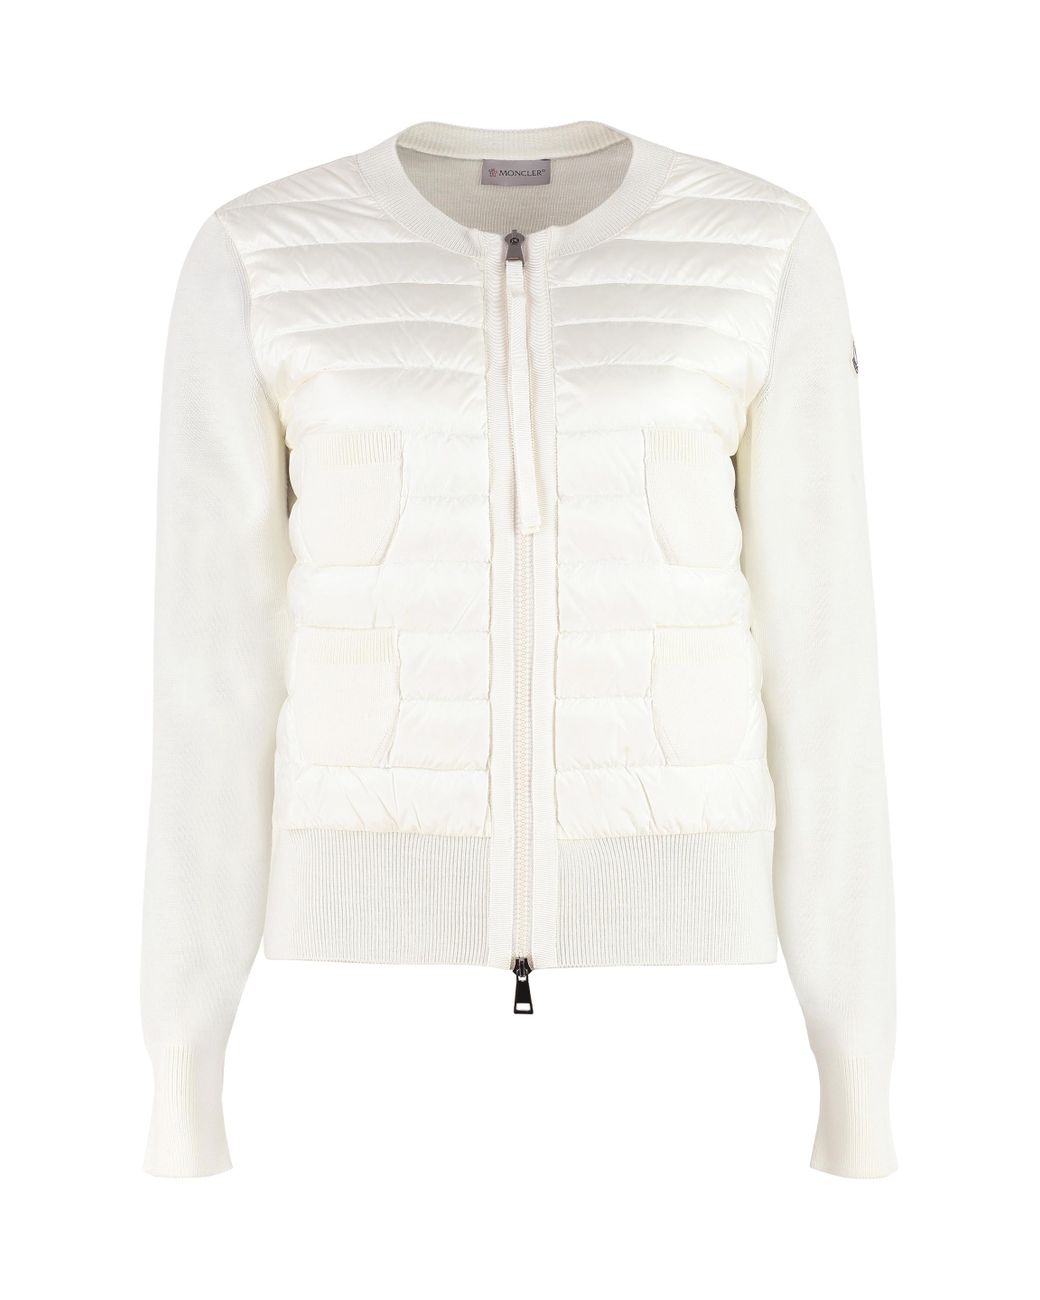 Moncler Wool Padded Front Panel Cardigan in White - Lyst